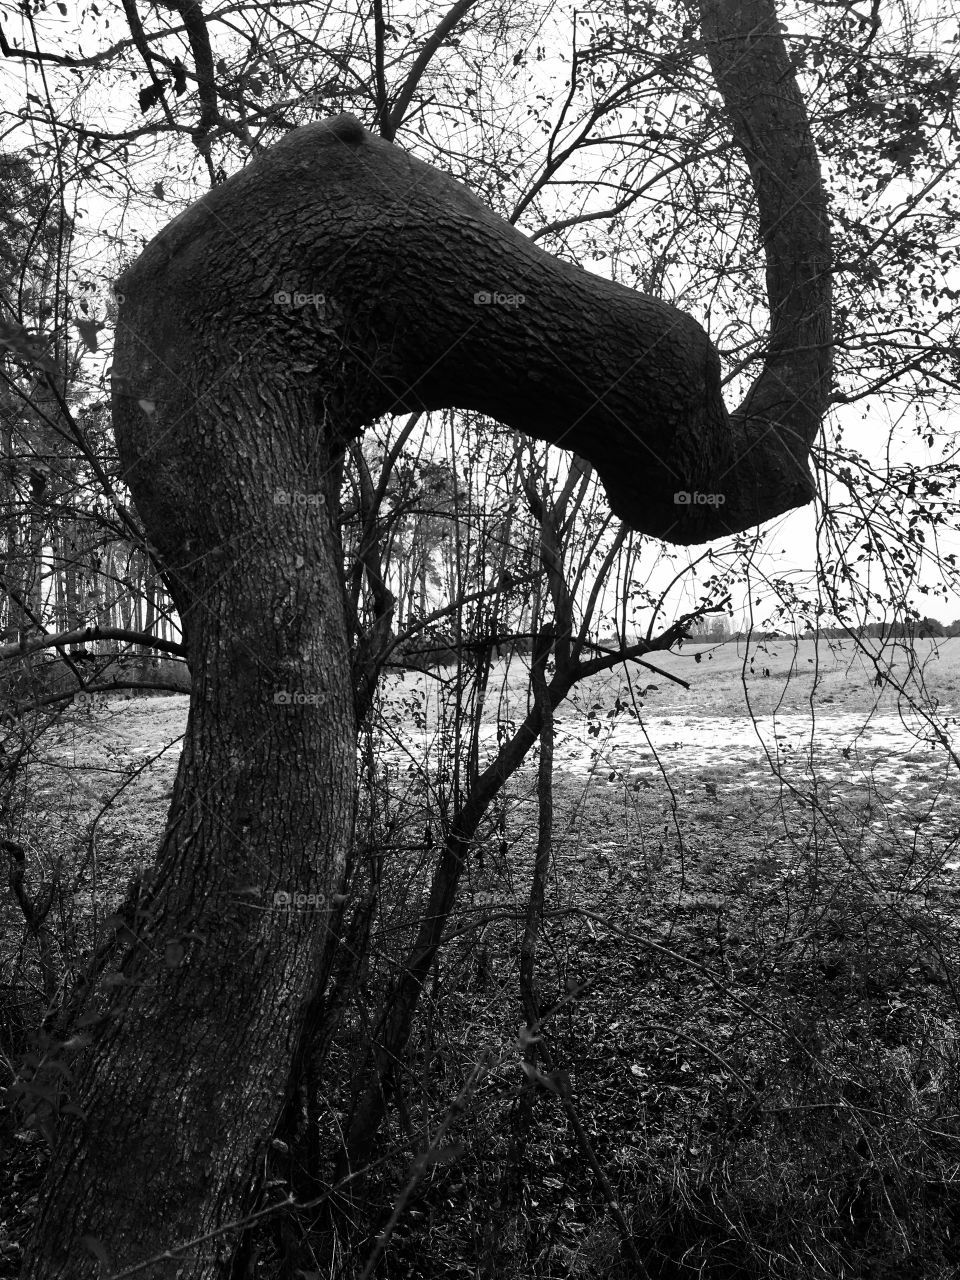 Black and white image of an old oak that resembles a Native American signal tree